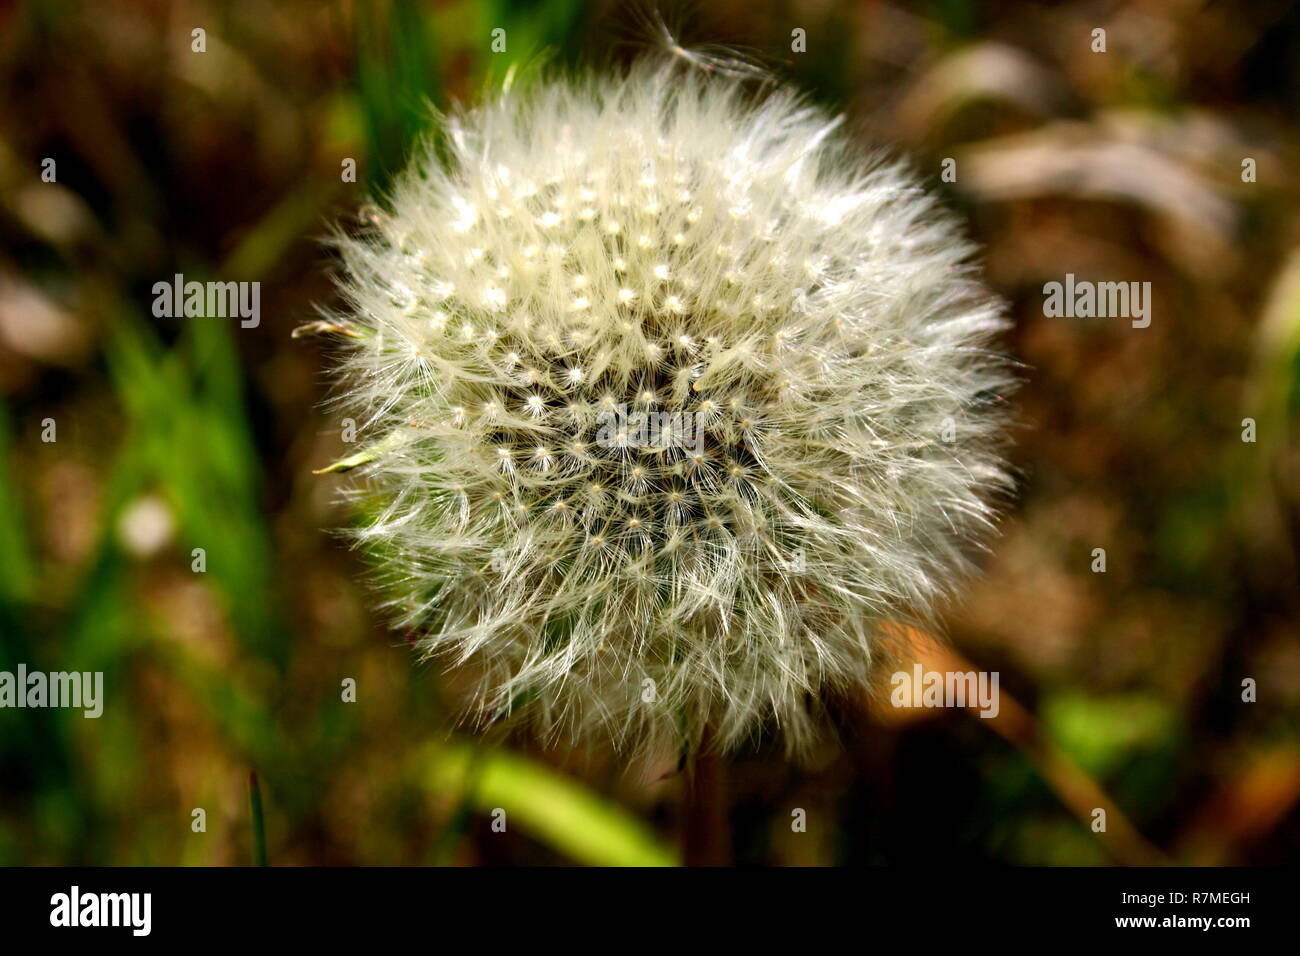 Close-up of a seeded dandelion with a blurry background. Stock Photo